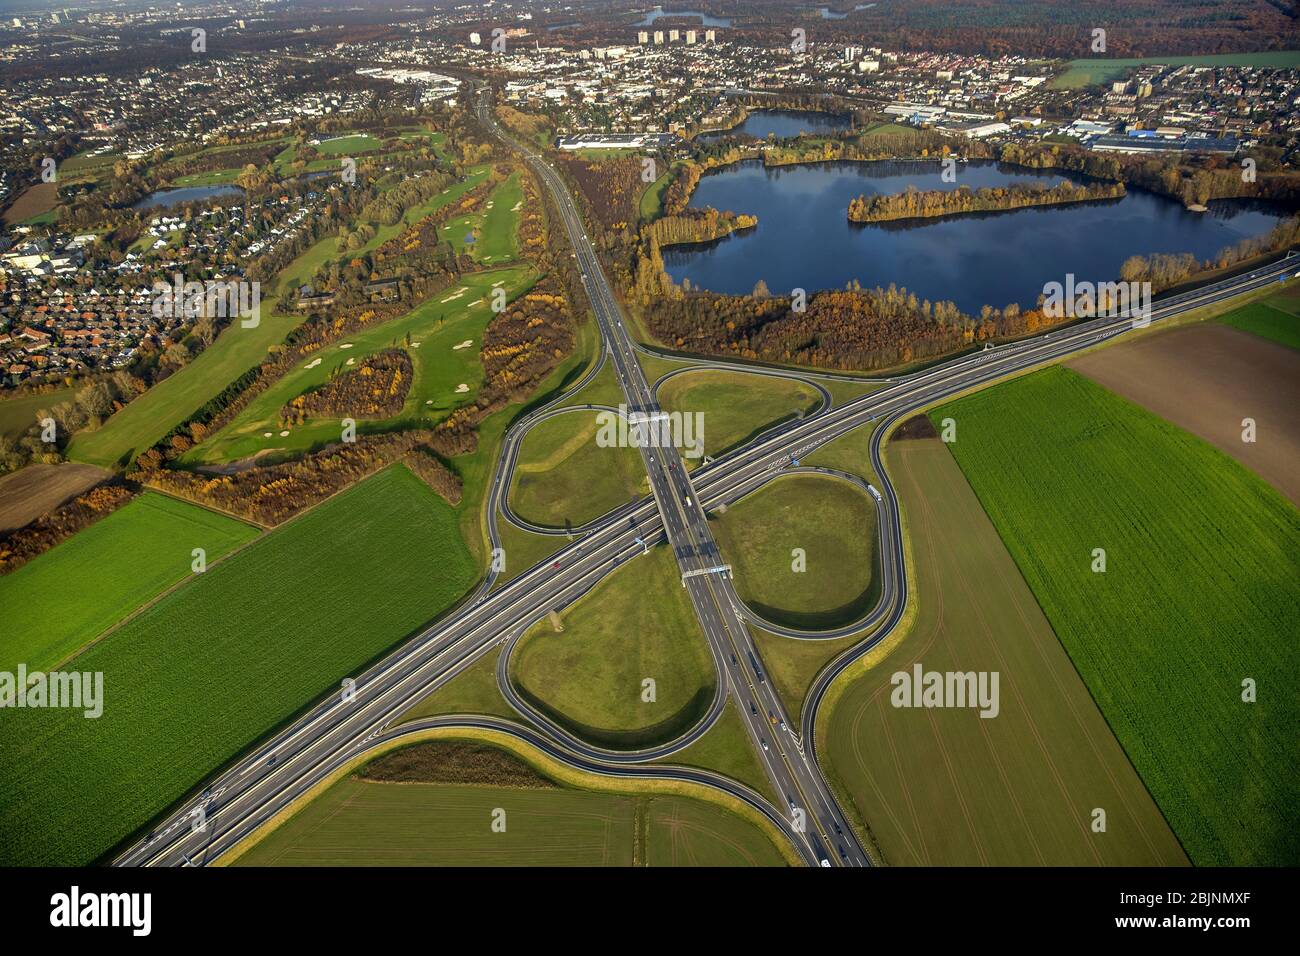 junction of A59 with A524, B8 and B288 at lake Rahmer See in Duisburg, 23.11.2016, aerial view, Germany, North Rhine-Westphalia, Ruhr Area, Duisburg Stock Photo